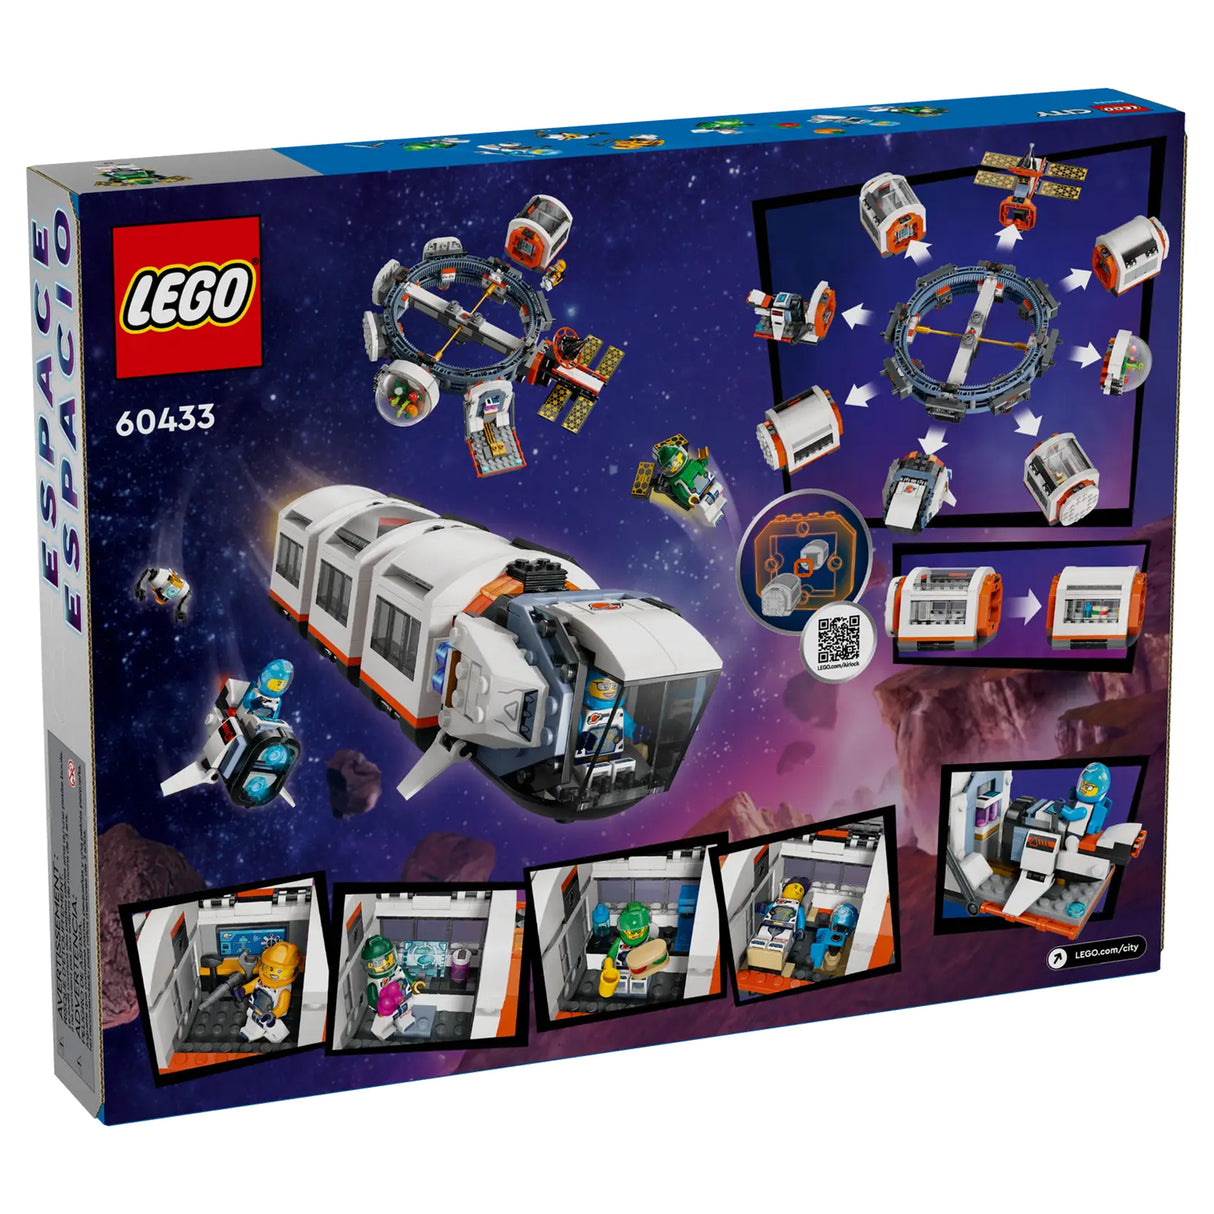 LEGO City Modular Space Station 60433, (1097-pieces)